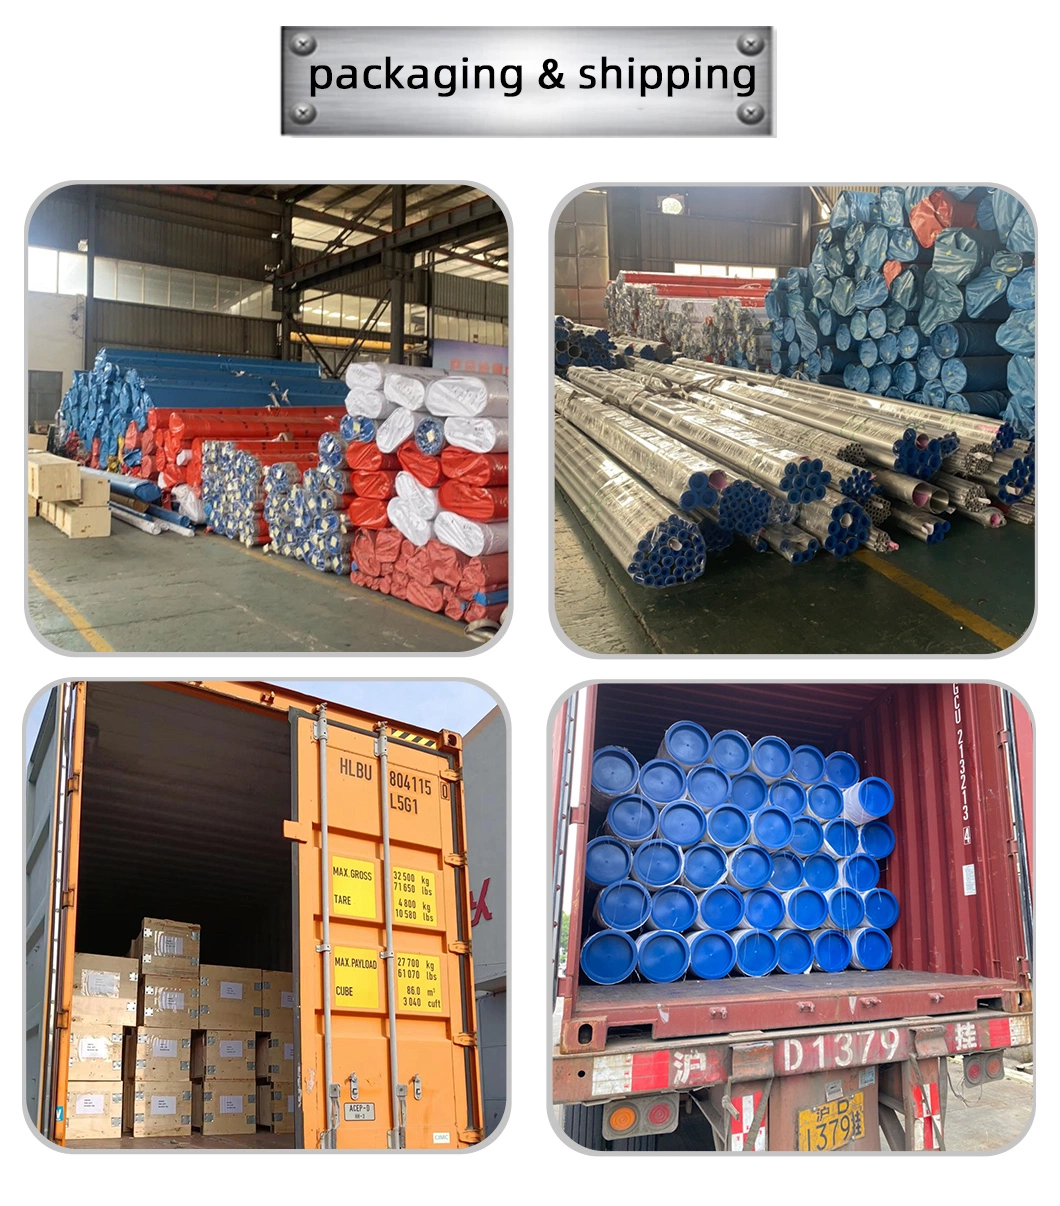 Duplex Stainless Steel Seamless Pipe Steel Pipe S32205 S31803 S32750 2205 2507 31803 for Fluid Transportboiler Heat Exchanger Oil Cracking High Pressure Boiler